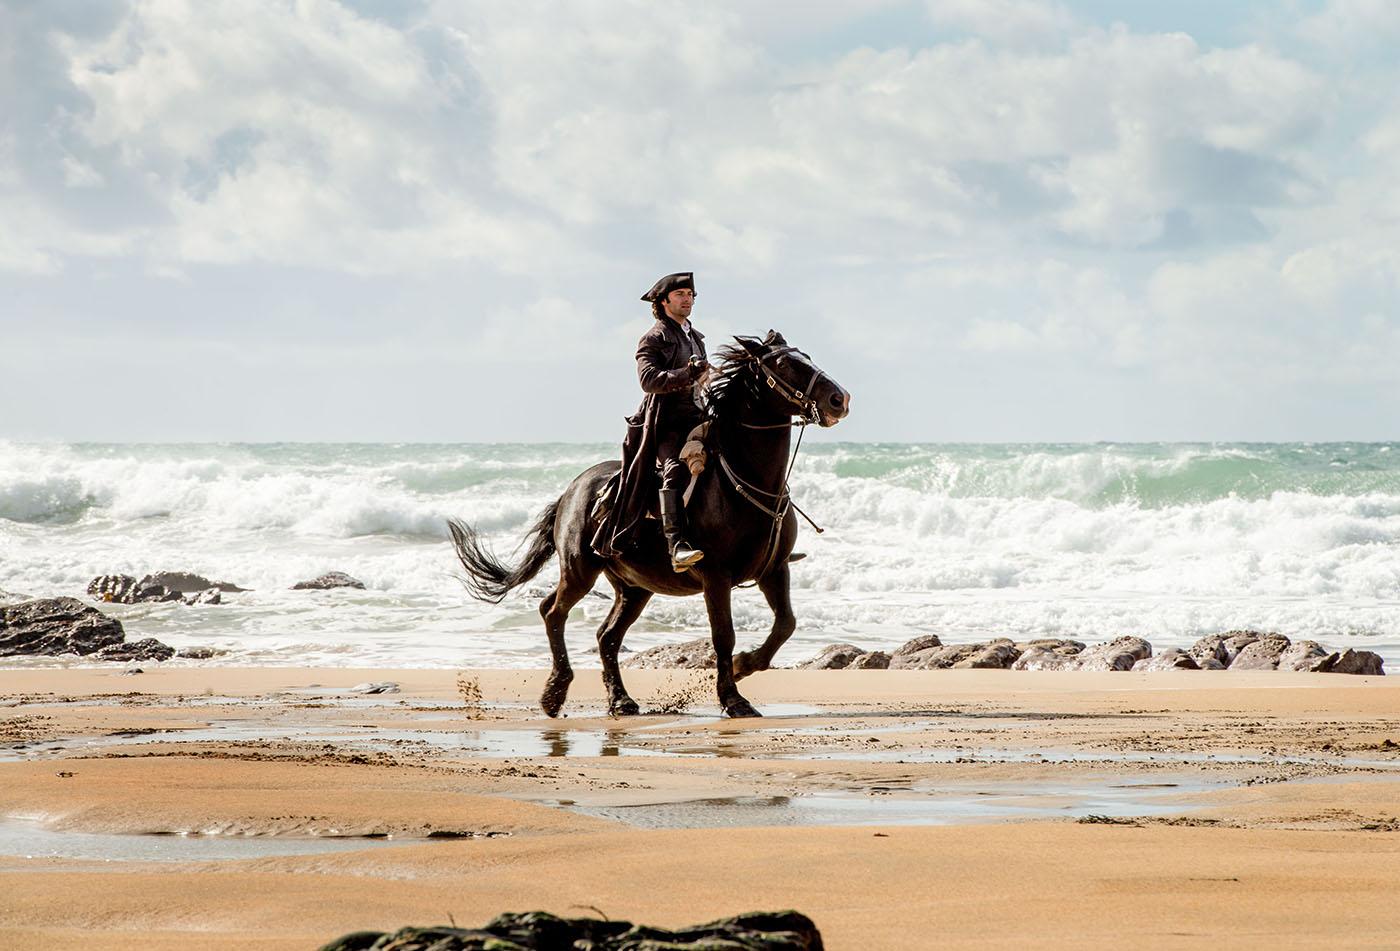 Ross Poldark. Photo: Mammoth Screen for BBC and MASTERPIECE